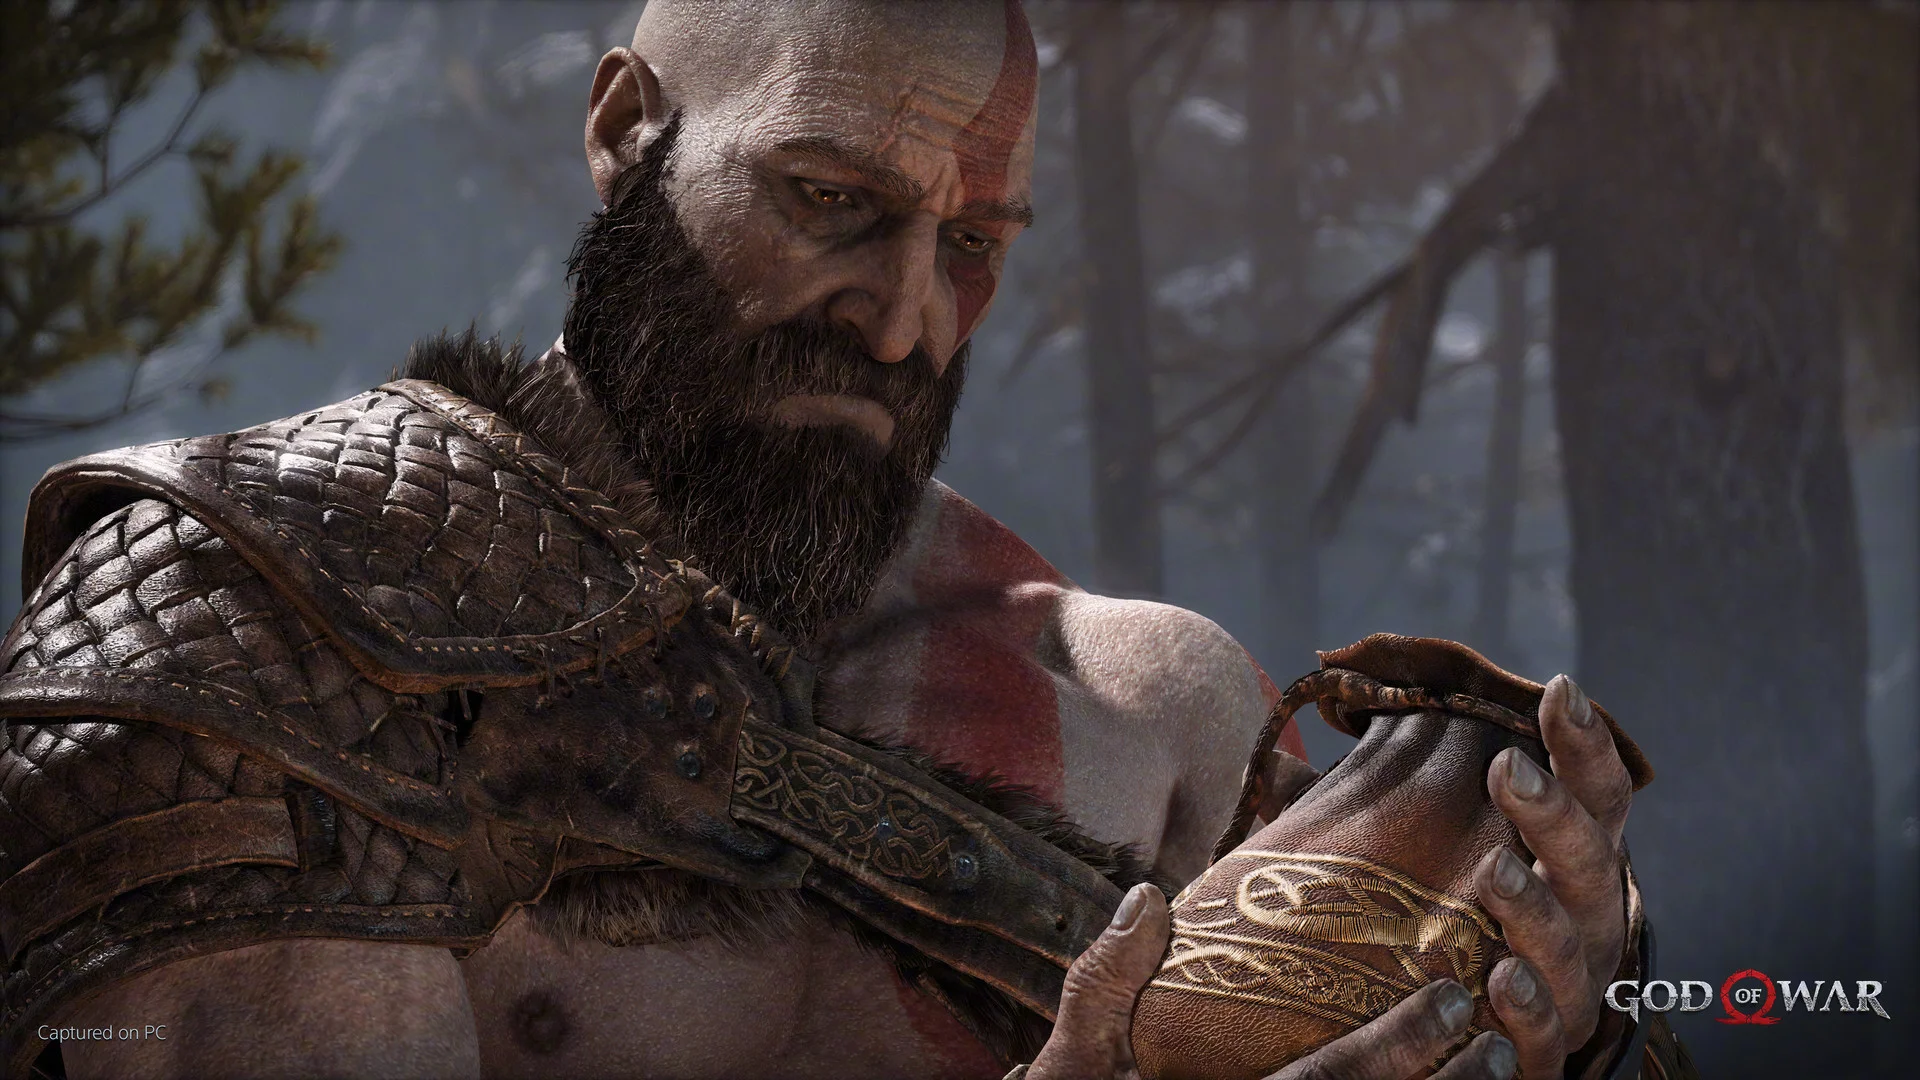 Game 'God of War' is expected to be adapted into a live-action series